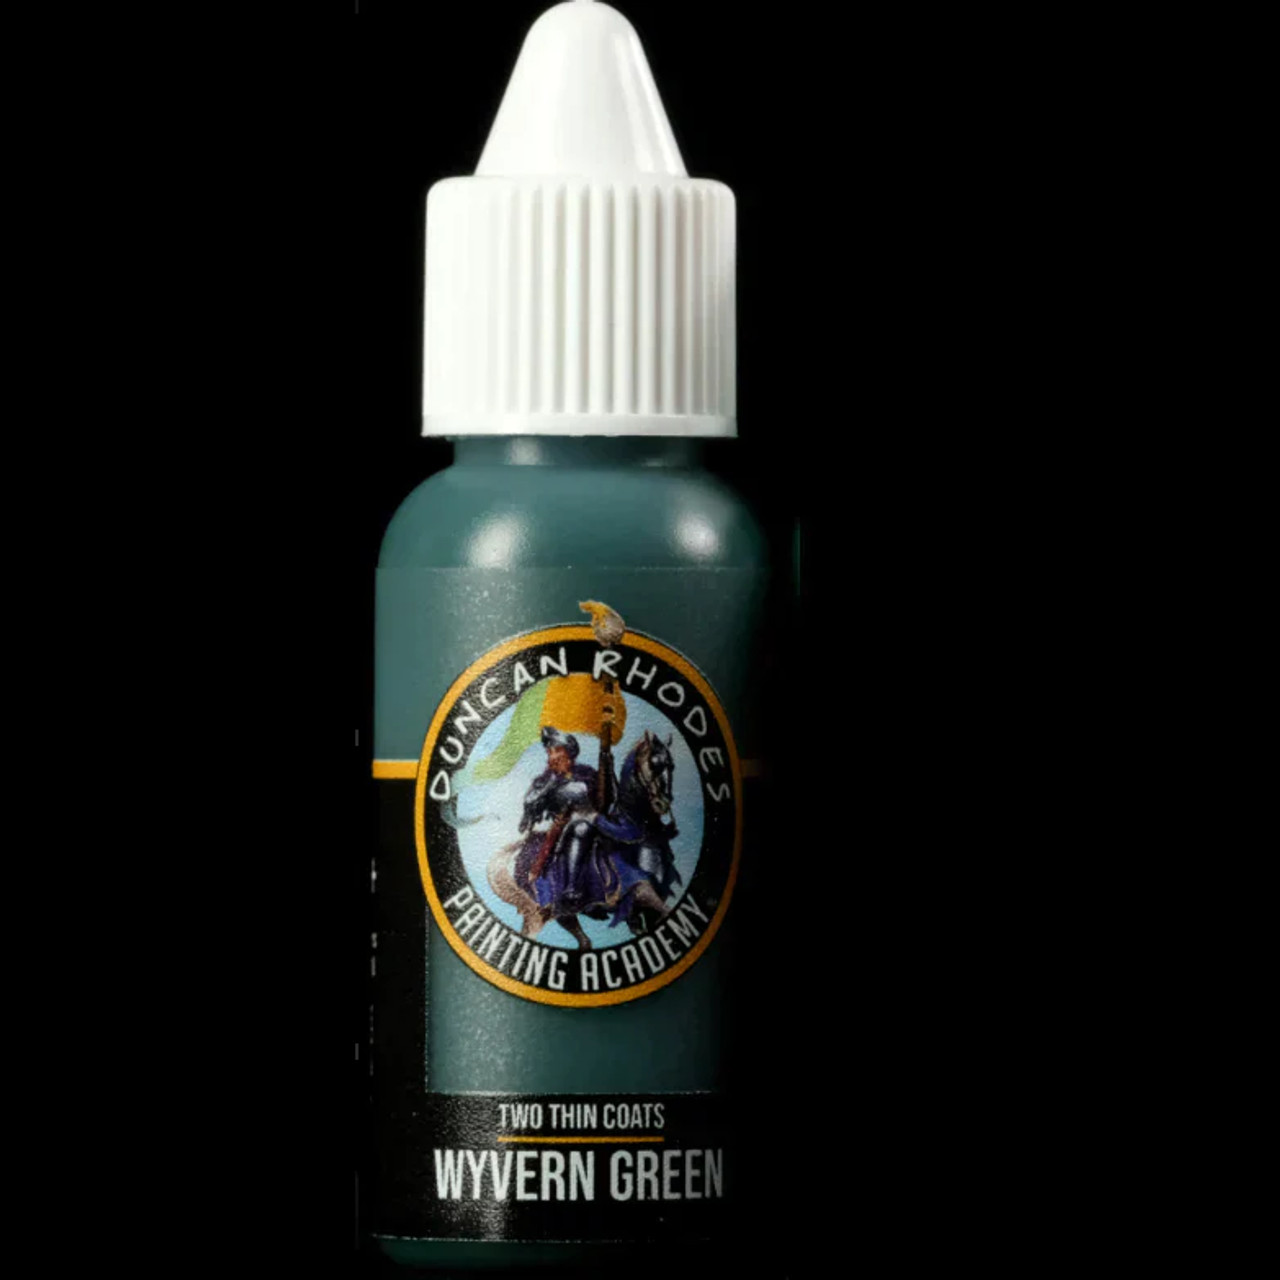 DR013 - Two Thin Coats: Wyvern Green